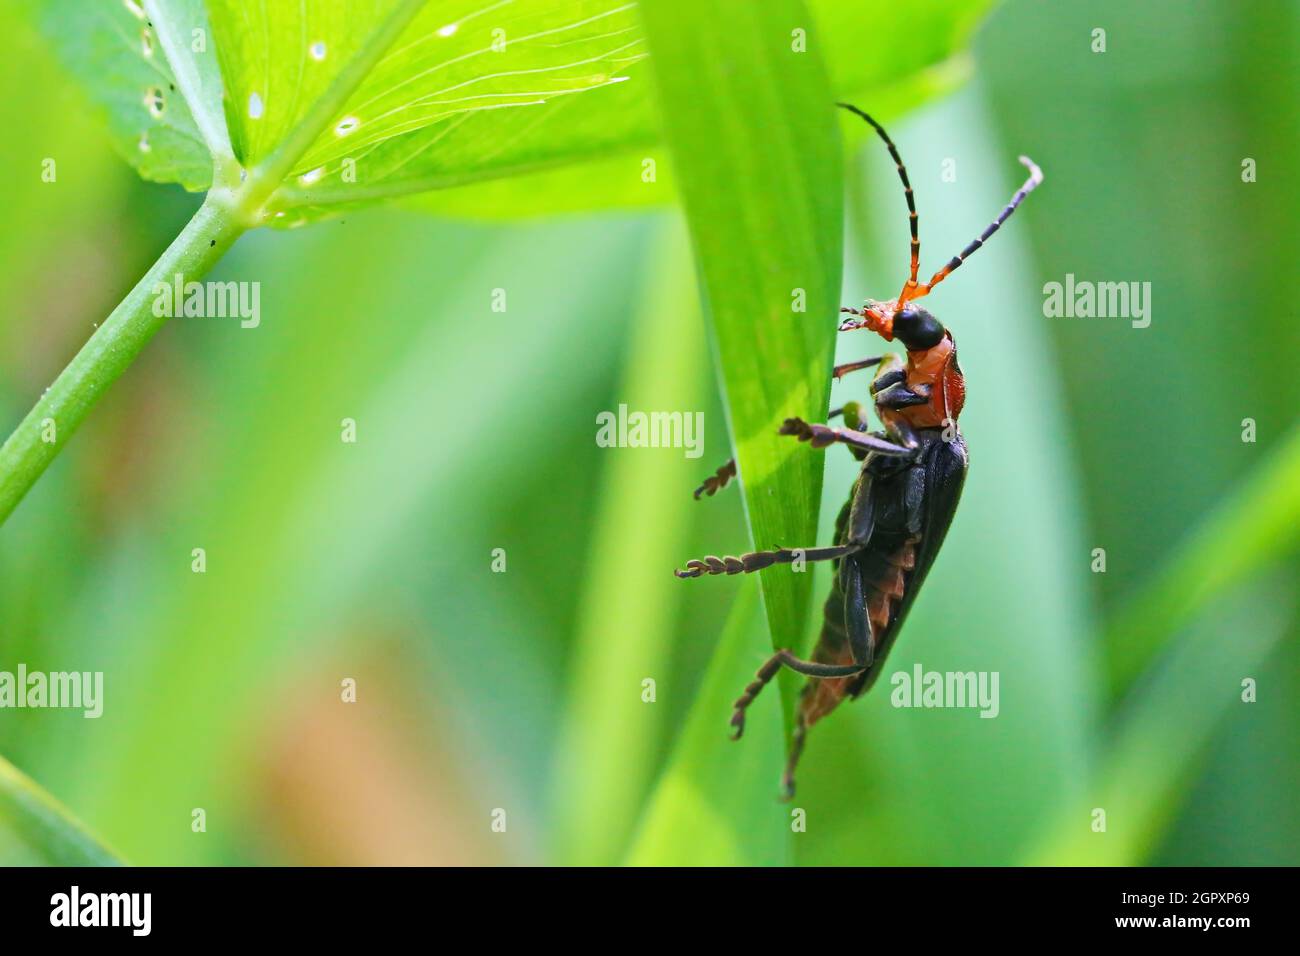 Close-up Of Insect On Plant Stock Photo